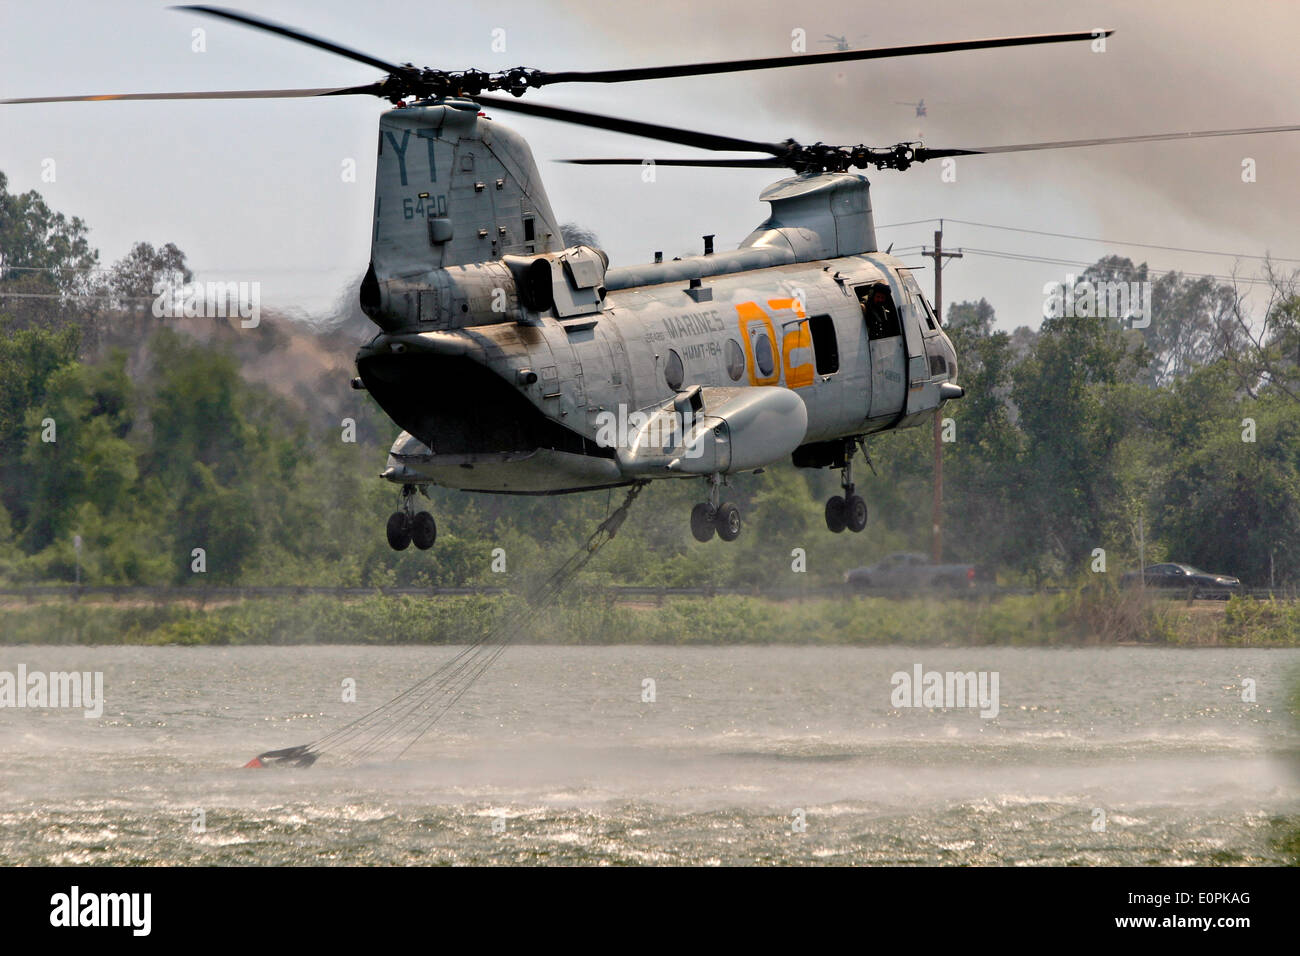 A US Marine Corps helicopter loads water into a Bambi bucket to help fight the Tomahawk and Las Pulgas wildfires as they burn the foothills May 16, 2014 around Camp Pendleton, California.  Evacuations forced more than 13,000 people from their homes as the fire burned across San Diego County. Stock Photo